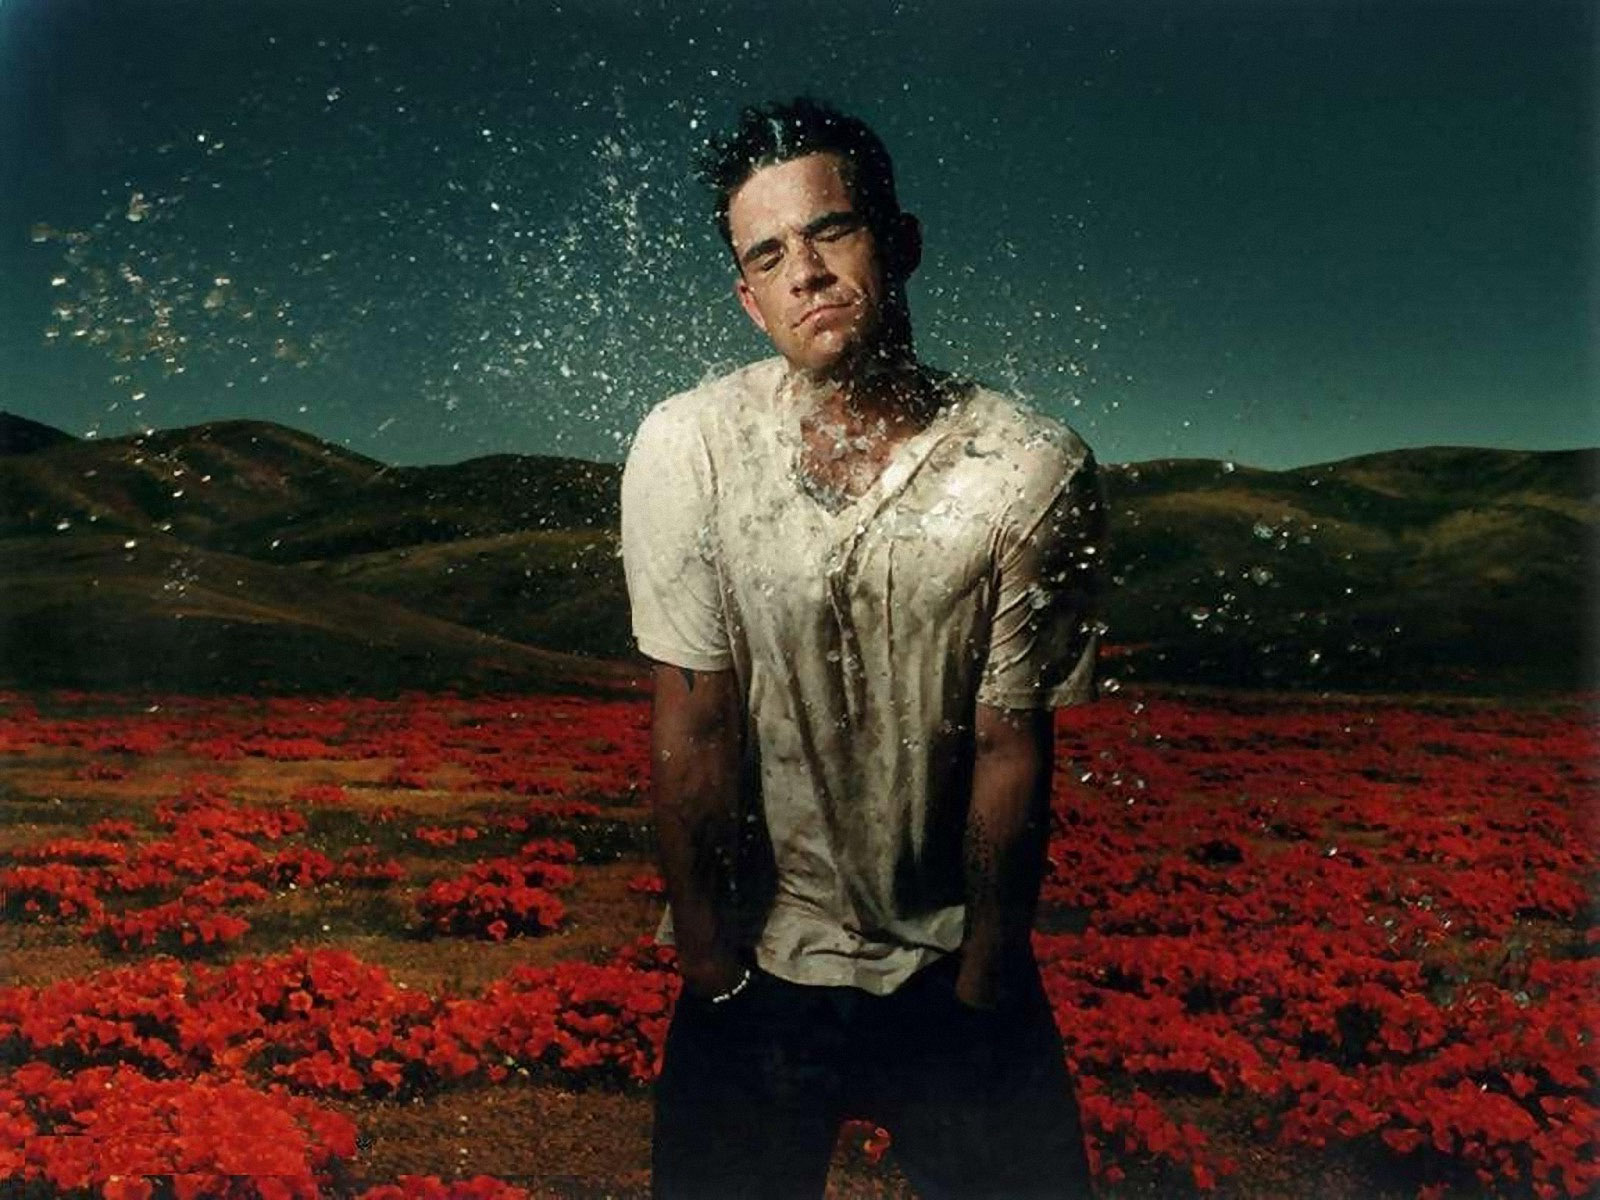 robbie williams wallpaper,sky,red,photography,human,atmosphere